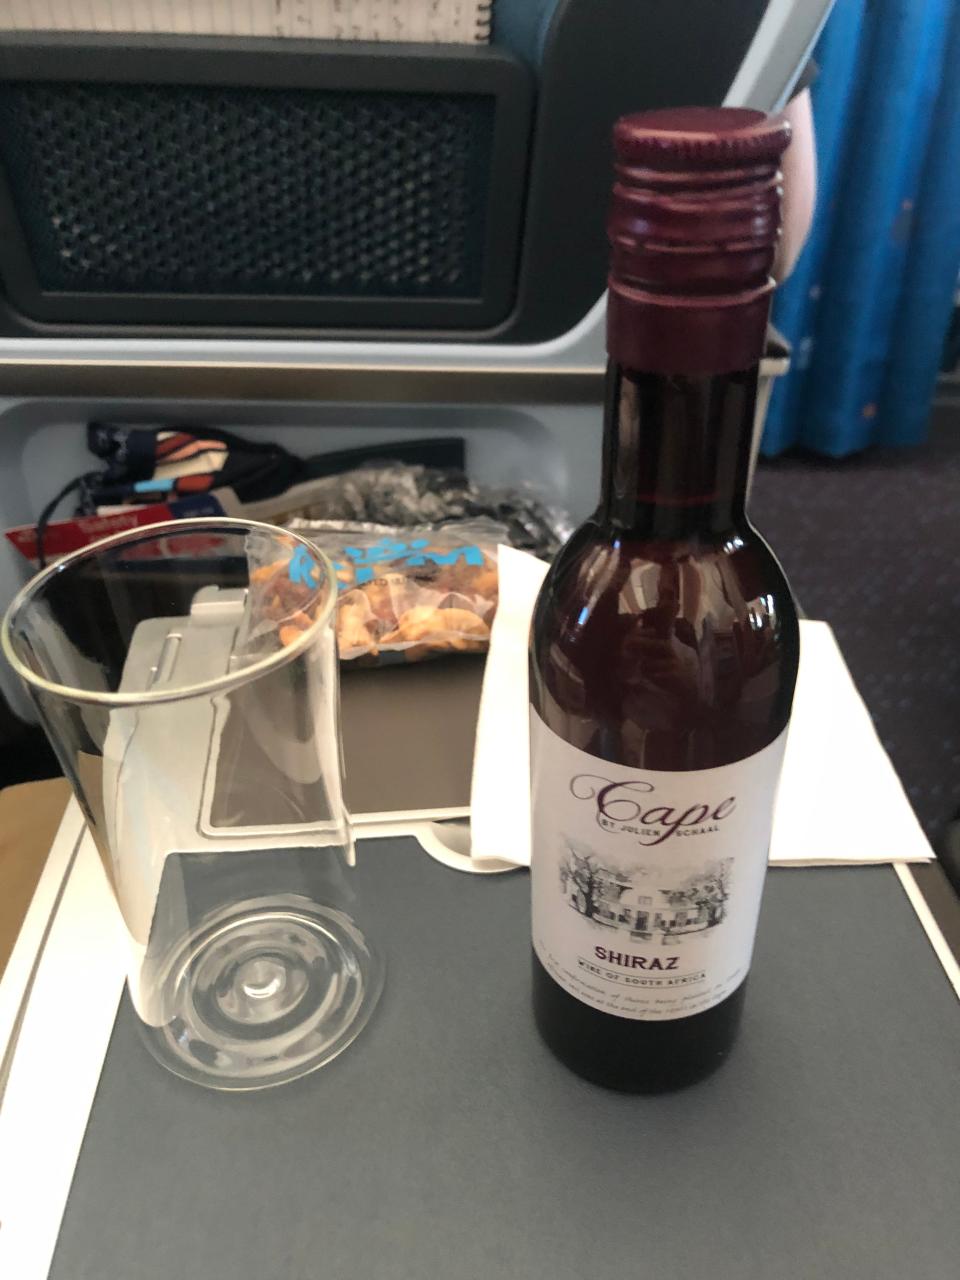 Wine from the first drink service in KLM's Premium Comfort class.